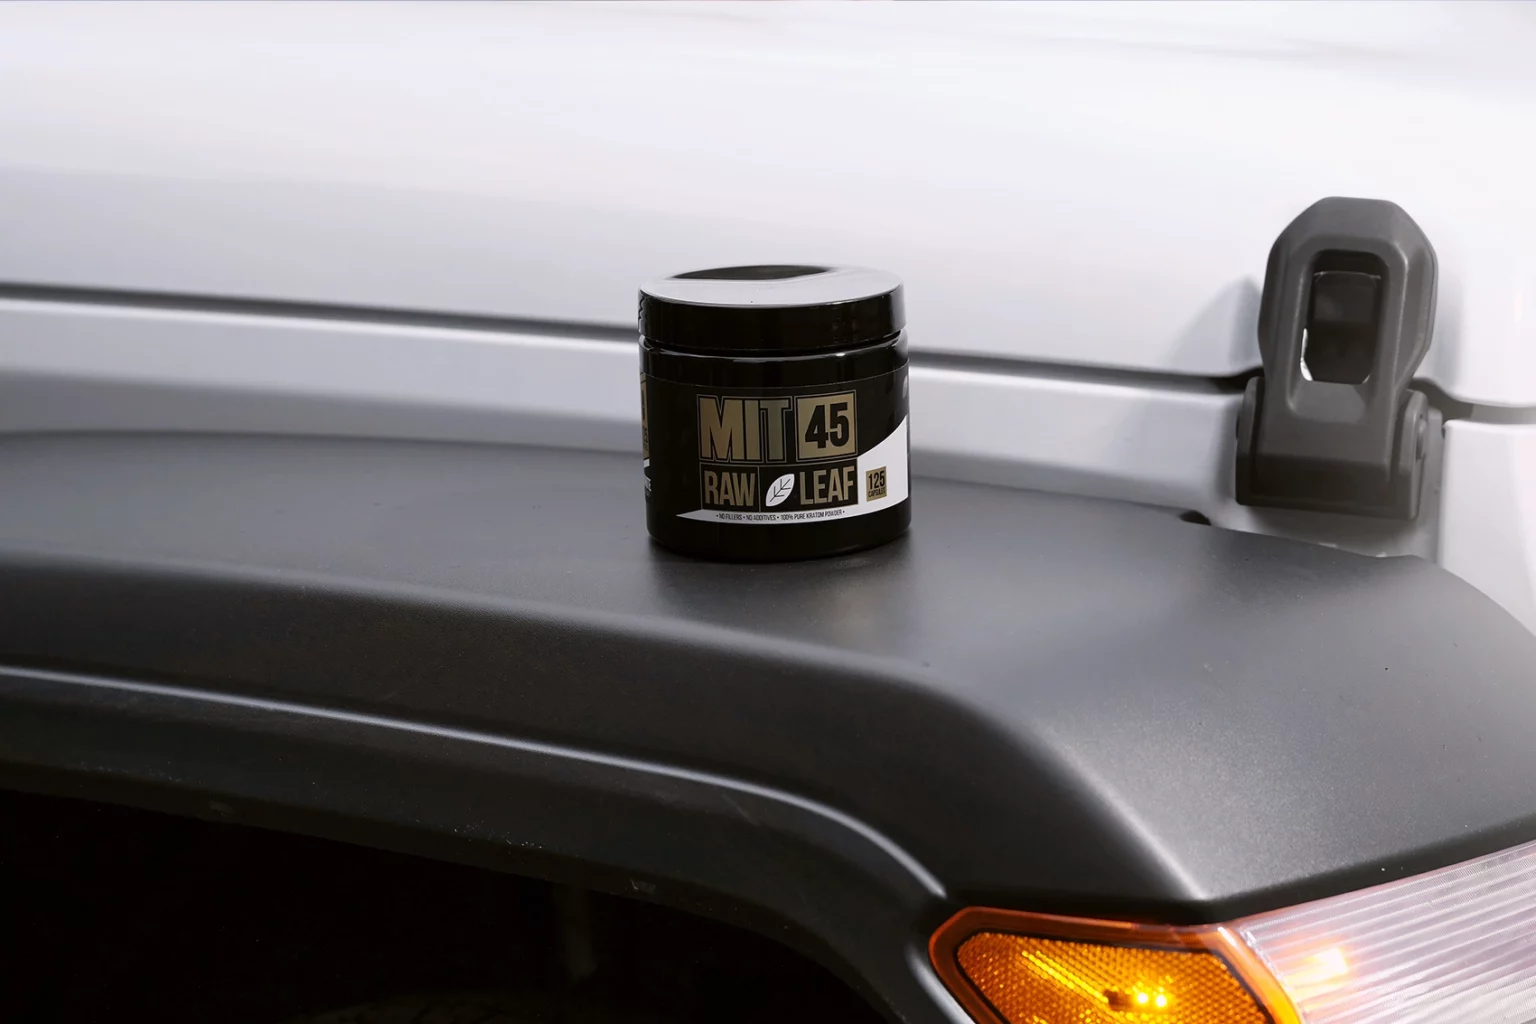 Canister of MIT45 white vein capsules on car fender